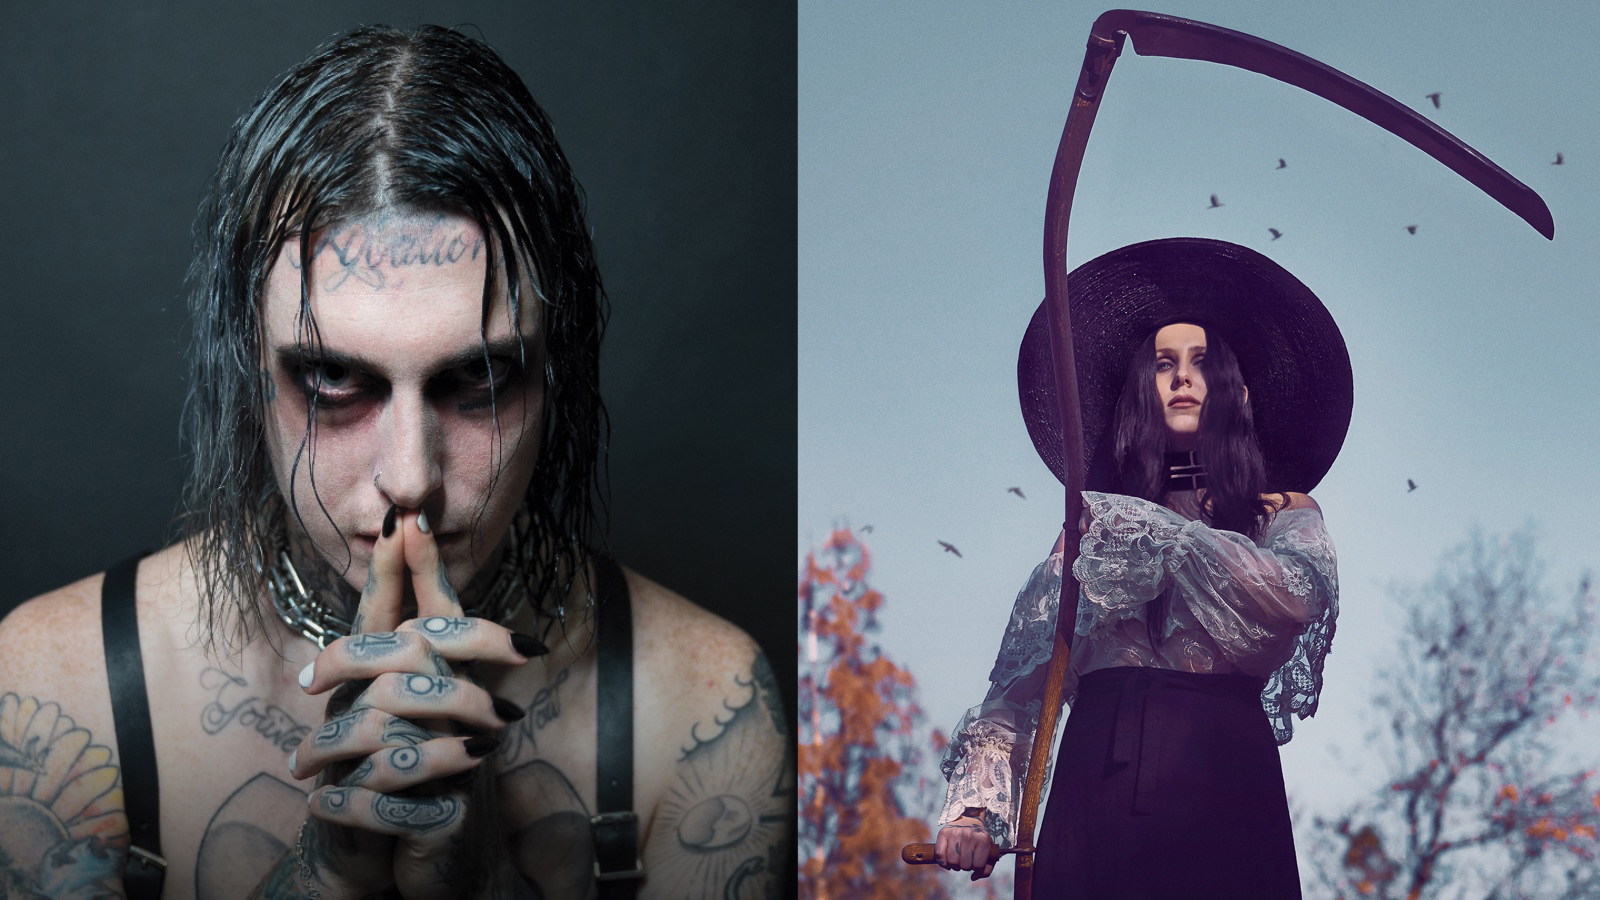 Ghostemane And Chelsea Wolfe Appear On Covers Of No Gods No Masters Issue Revolver